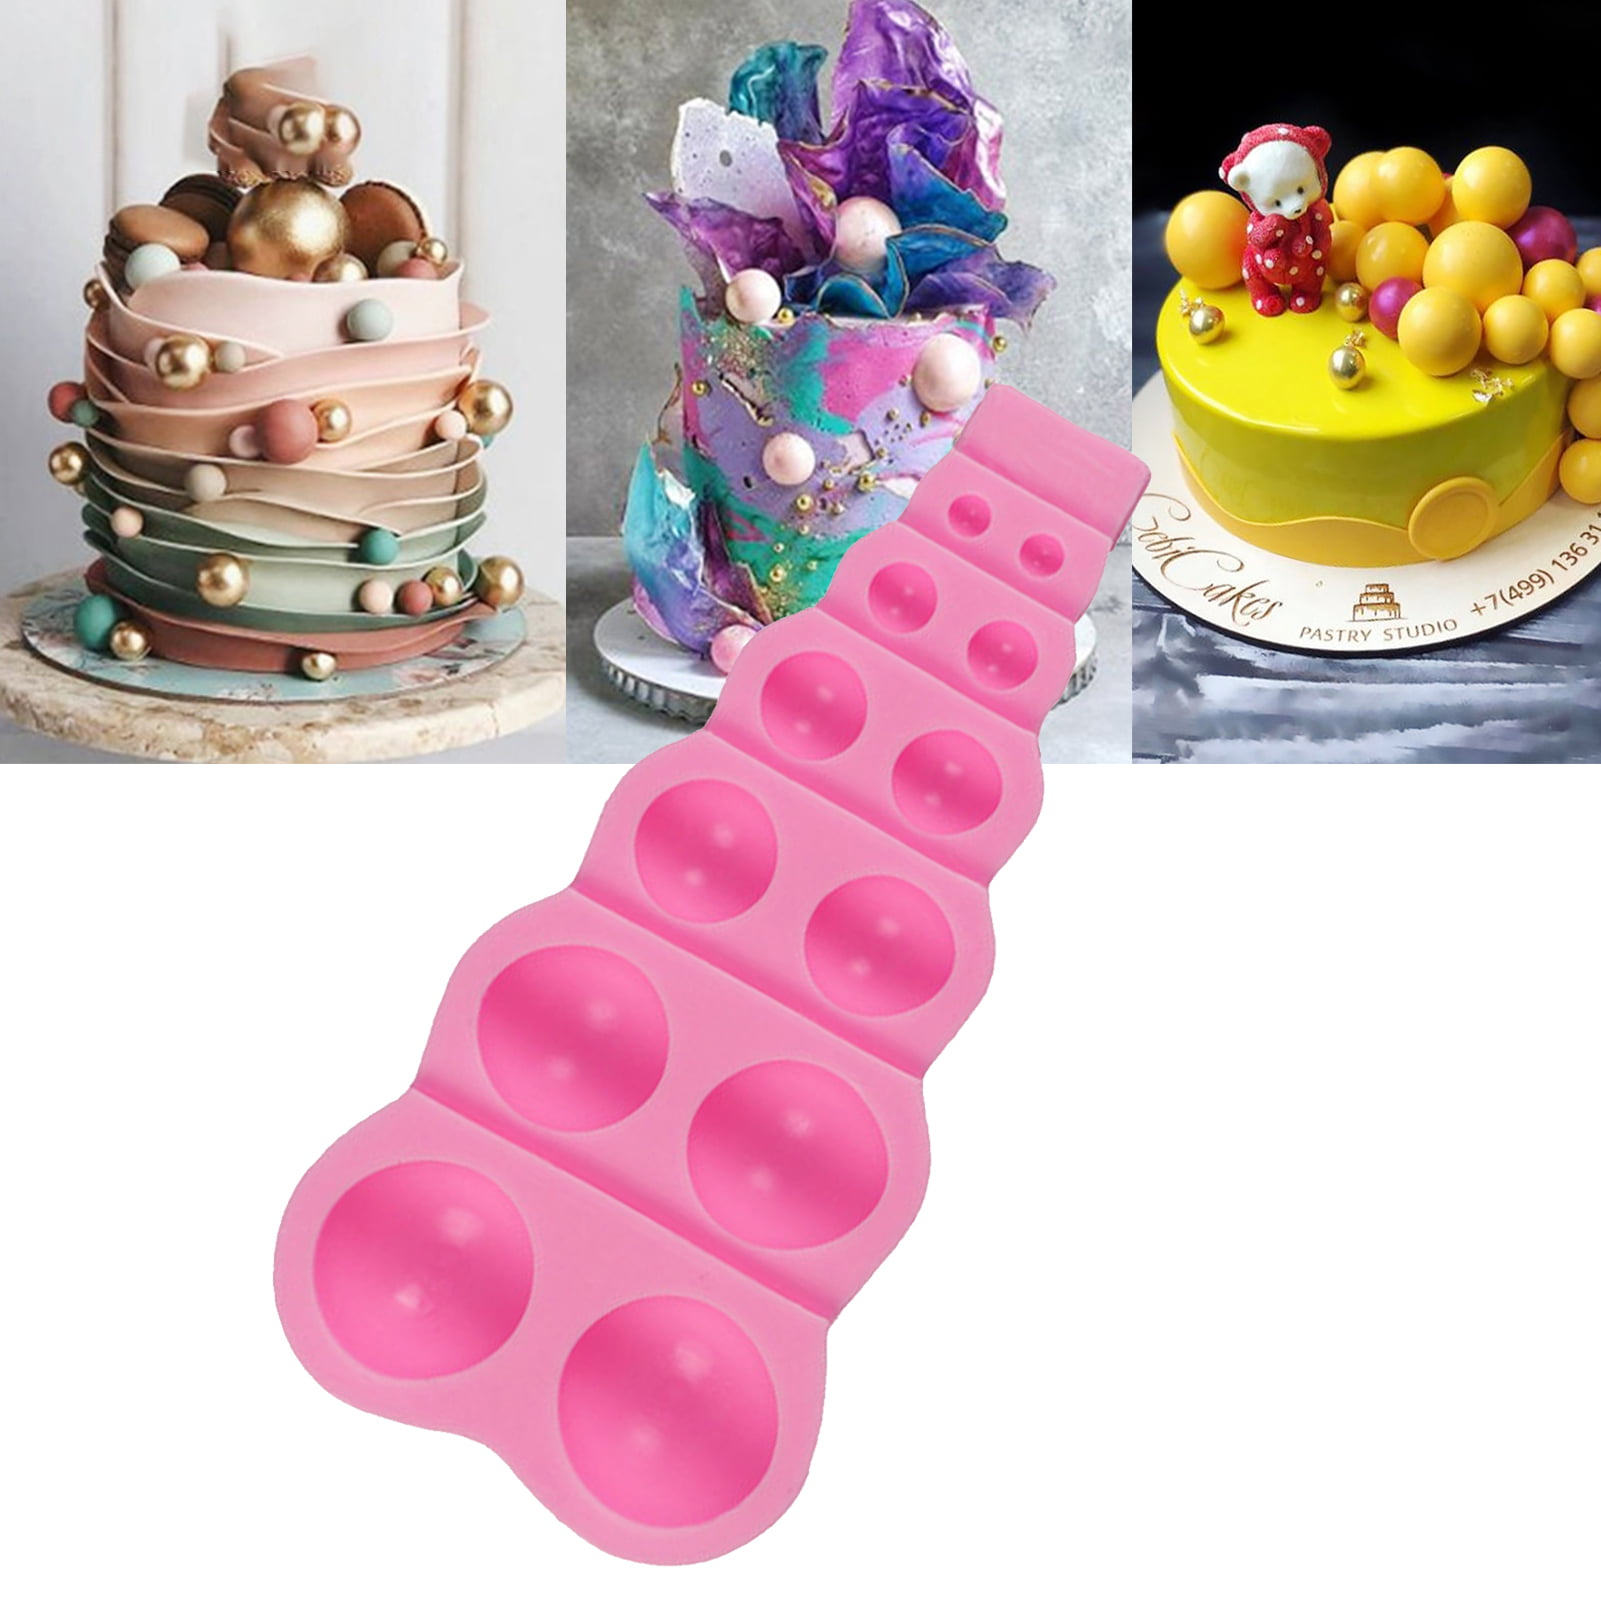 Half Ball Silicone Mold for Chocolate Truffles Desserts Cake Decorating  Tool Cake Decoration Baking Supplies Silicone Mold 